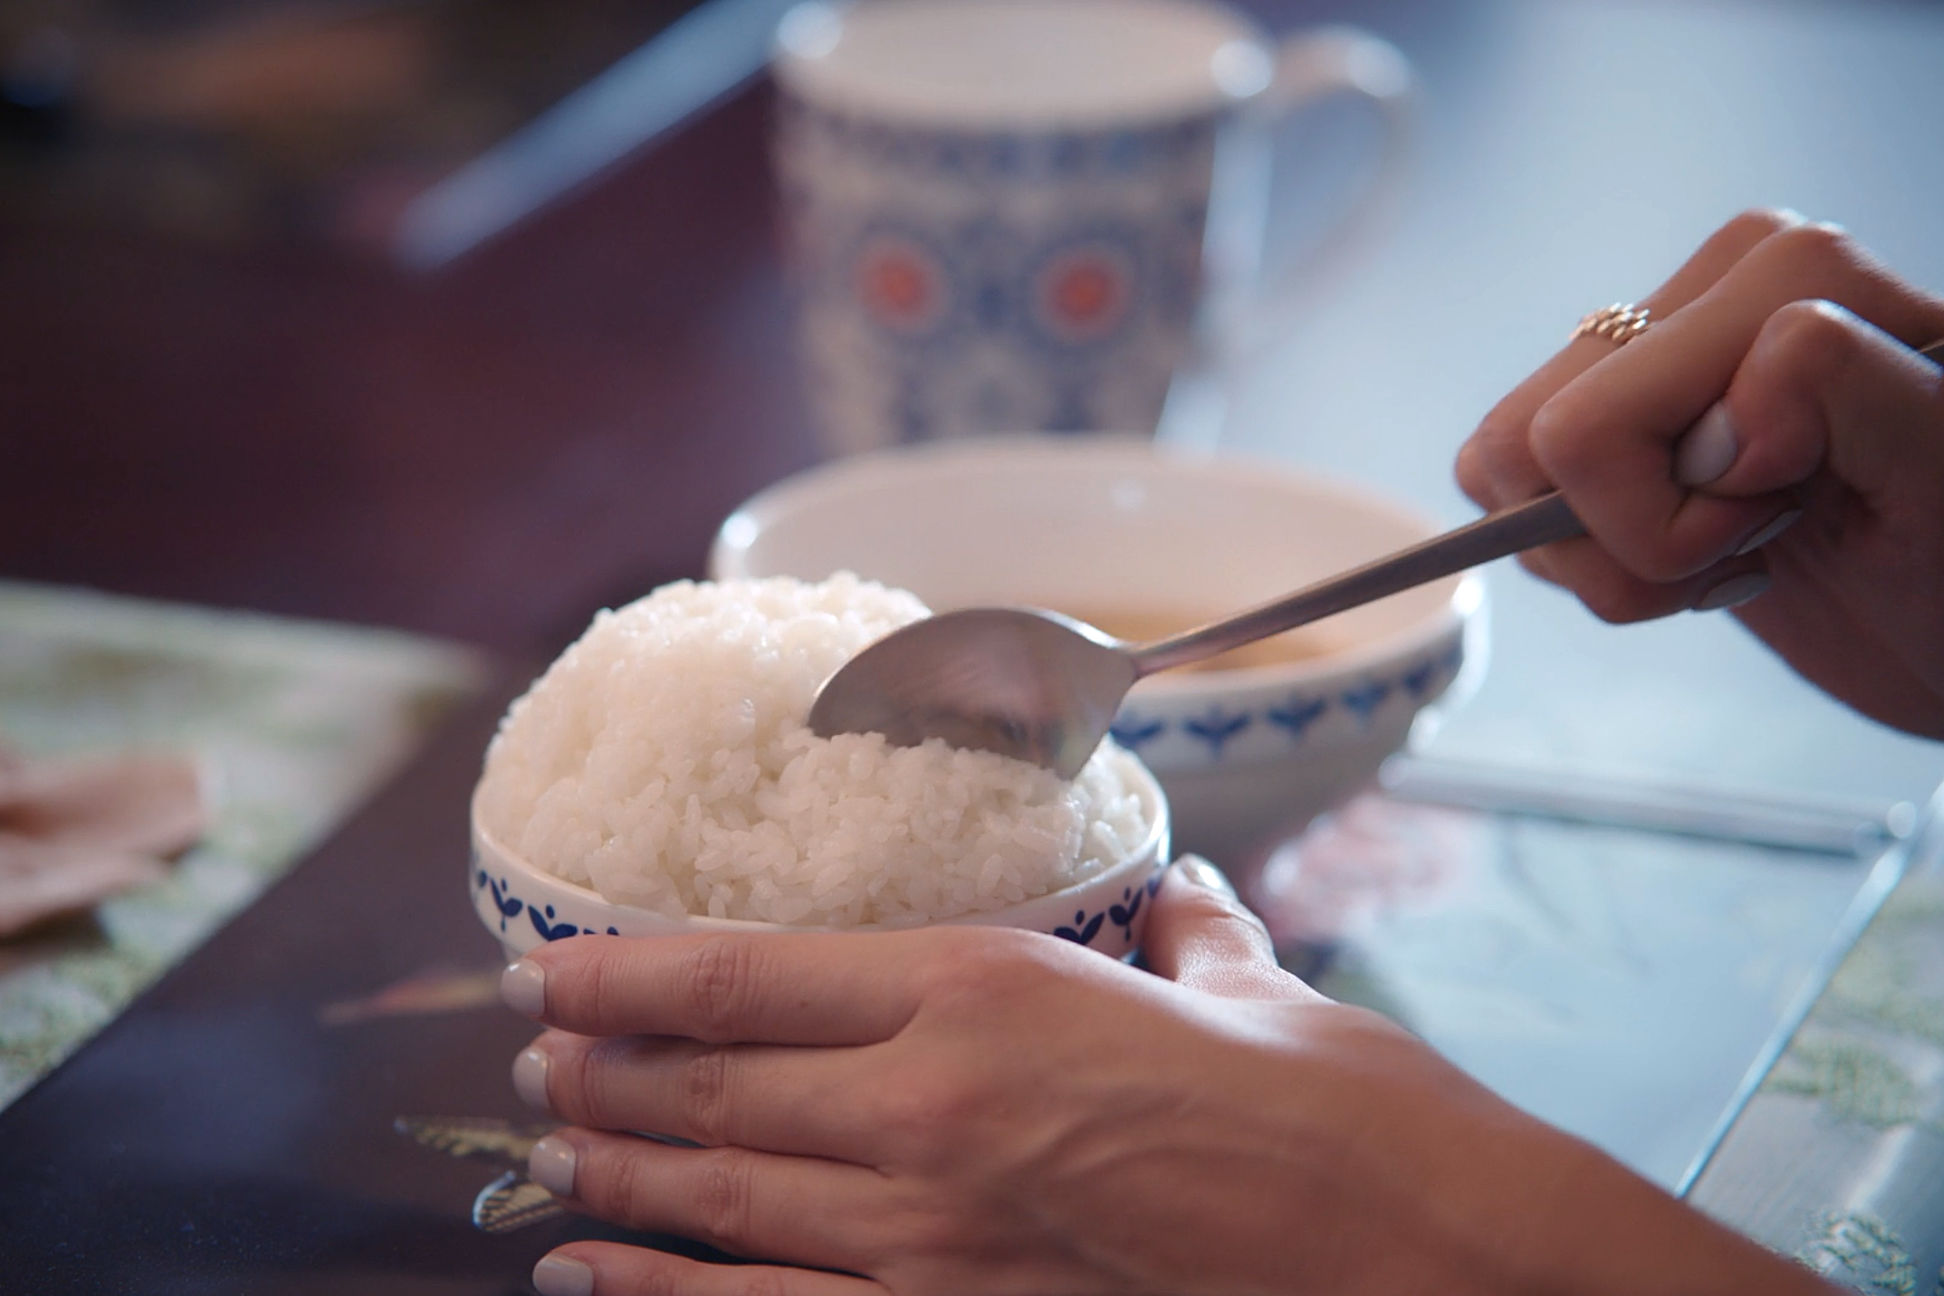 White rice, or “sticky” rice, can be eaten with a spoon or chopsticks